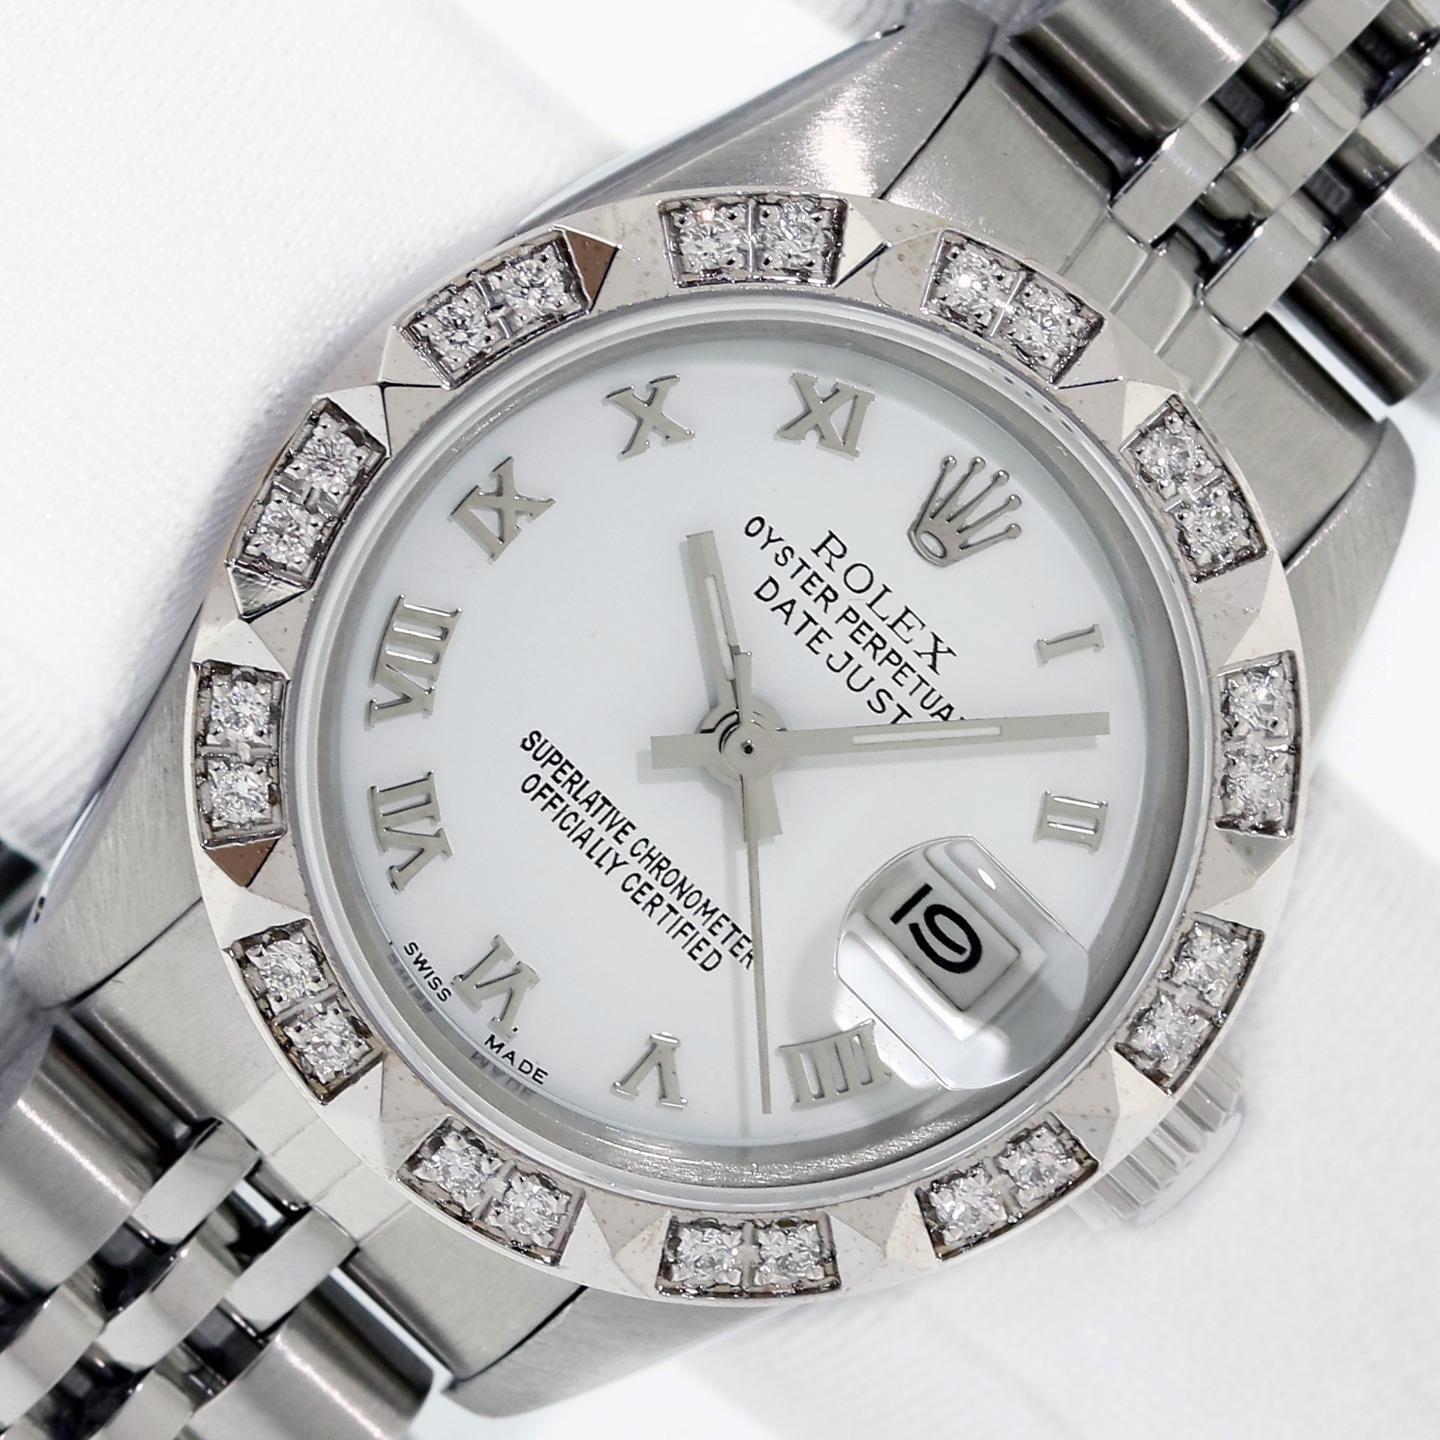 Ladies Rolex Datejust Stainless Steel 18k White Gold White Roman Dial Watch 26mm